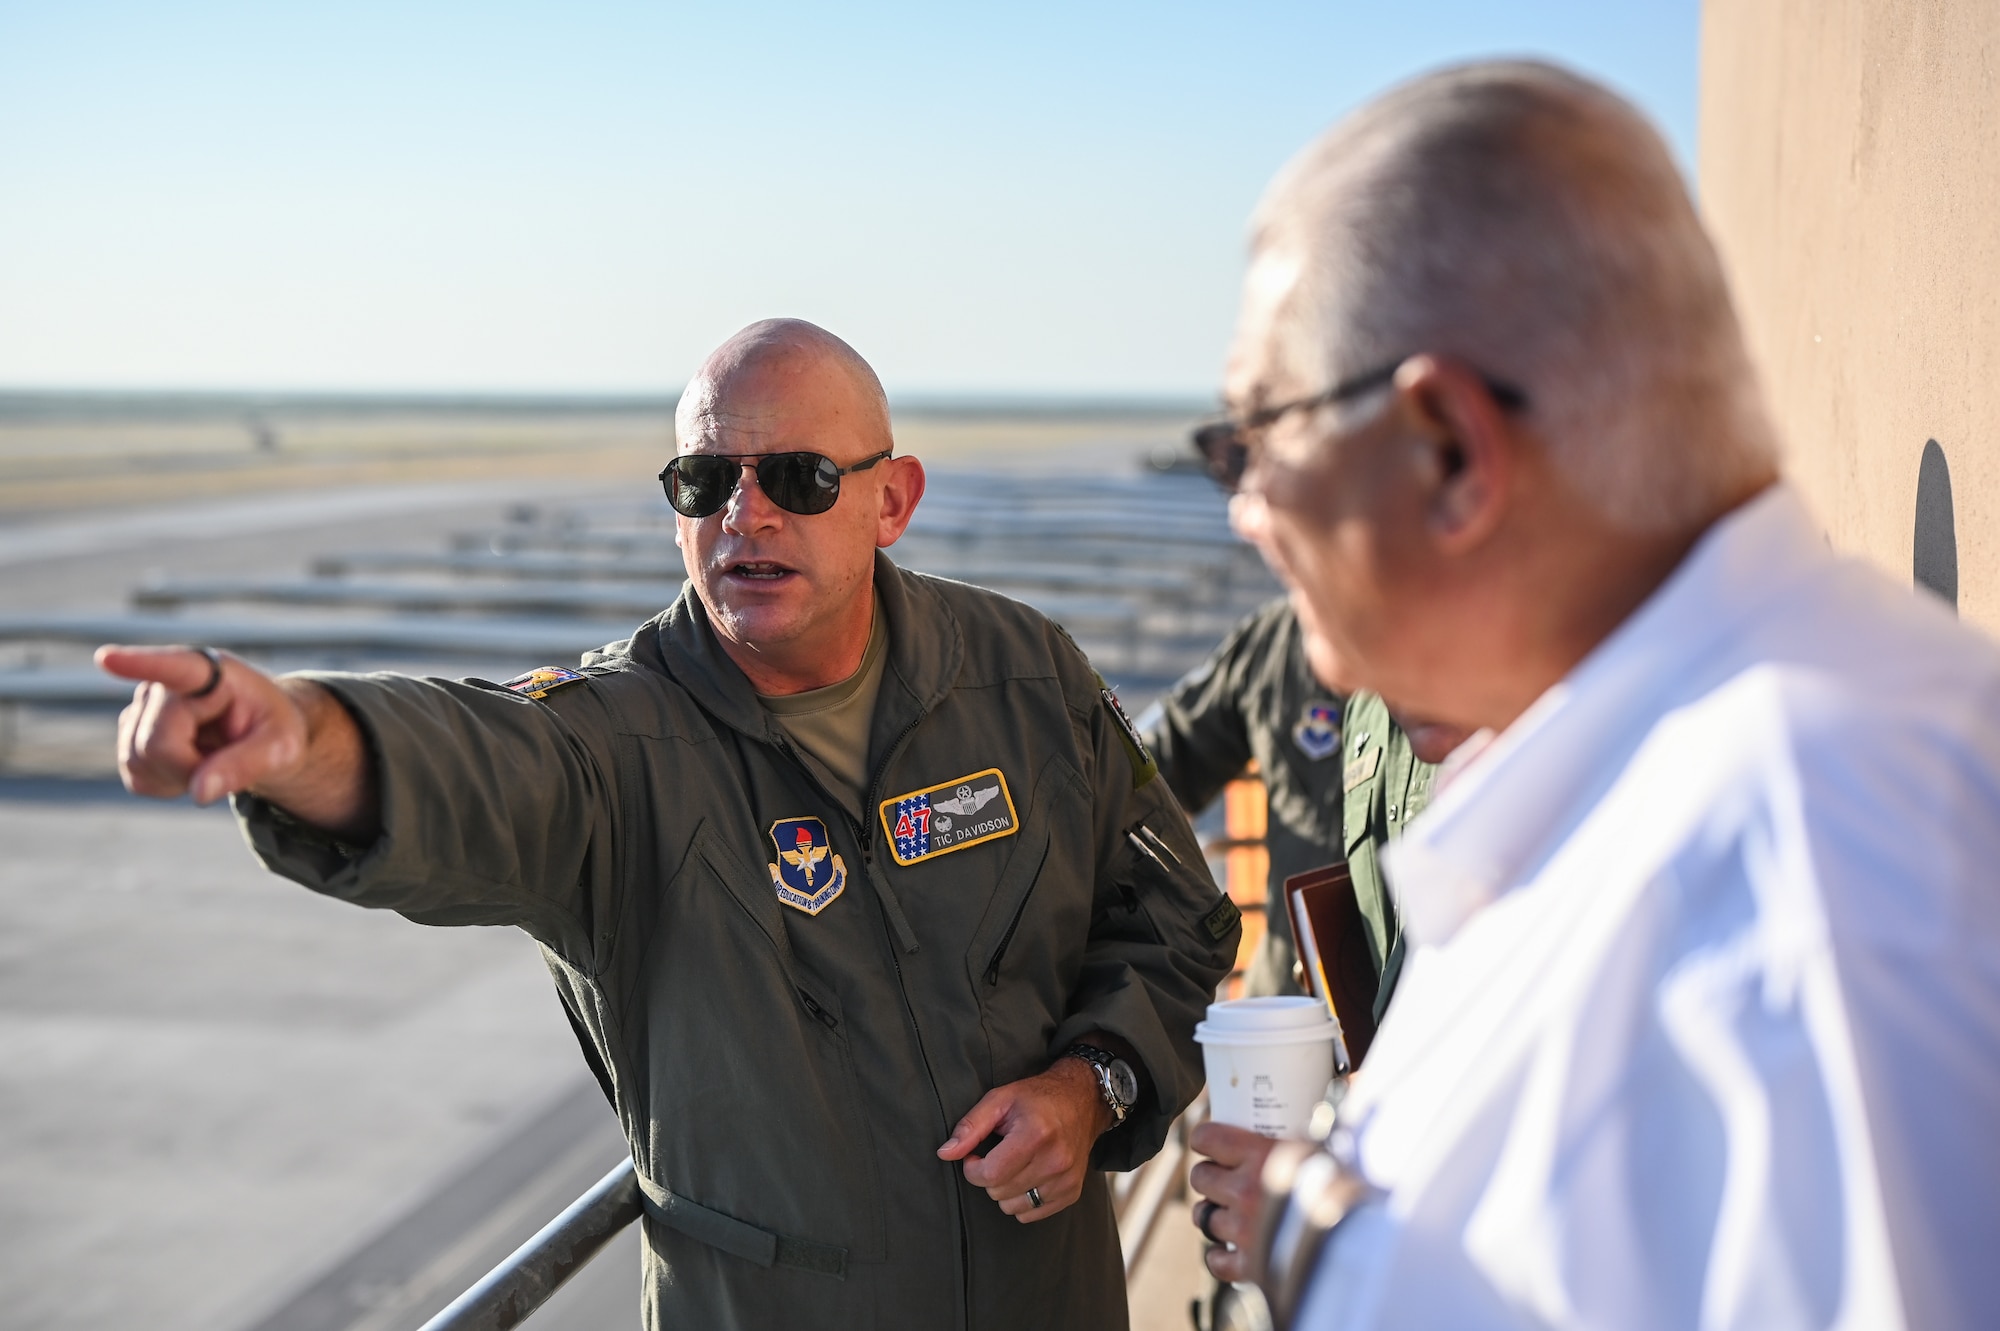 U.S. Air Force Col. Kevin Davidson, 47th Flying Training Wing commander, points at a T-38C Talon at the end of the flightline during a base tour with the leaders from the U.S. Border Patrol, Del Rio Sector and the Val Verde County Sheriff's Department at Laughlin Air Force Base, Texas, Aug. 4, 2023. The primary objective of the visit was to strengthen community partnerships to support future cooperation, community safety, and training opportunities. (U.S. Air Force photo by Airman 1st Class Keira Rossman)